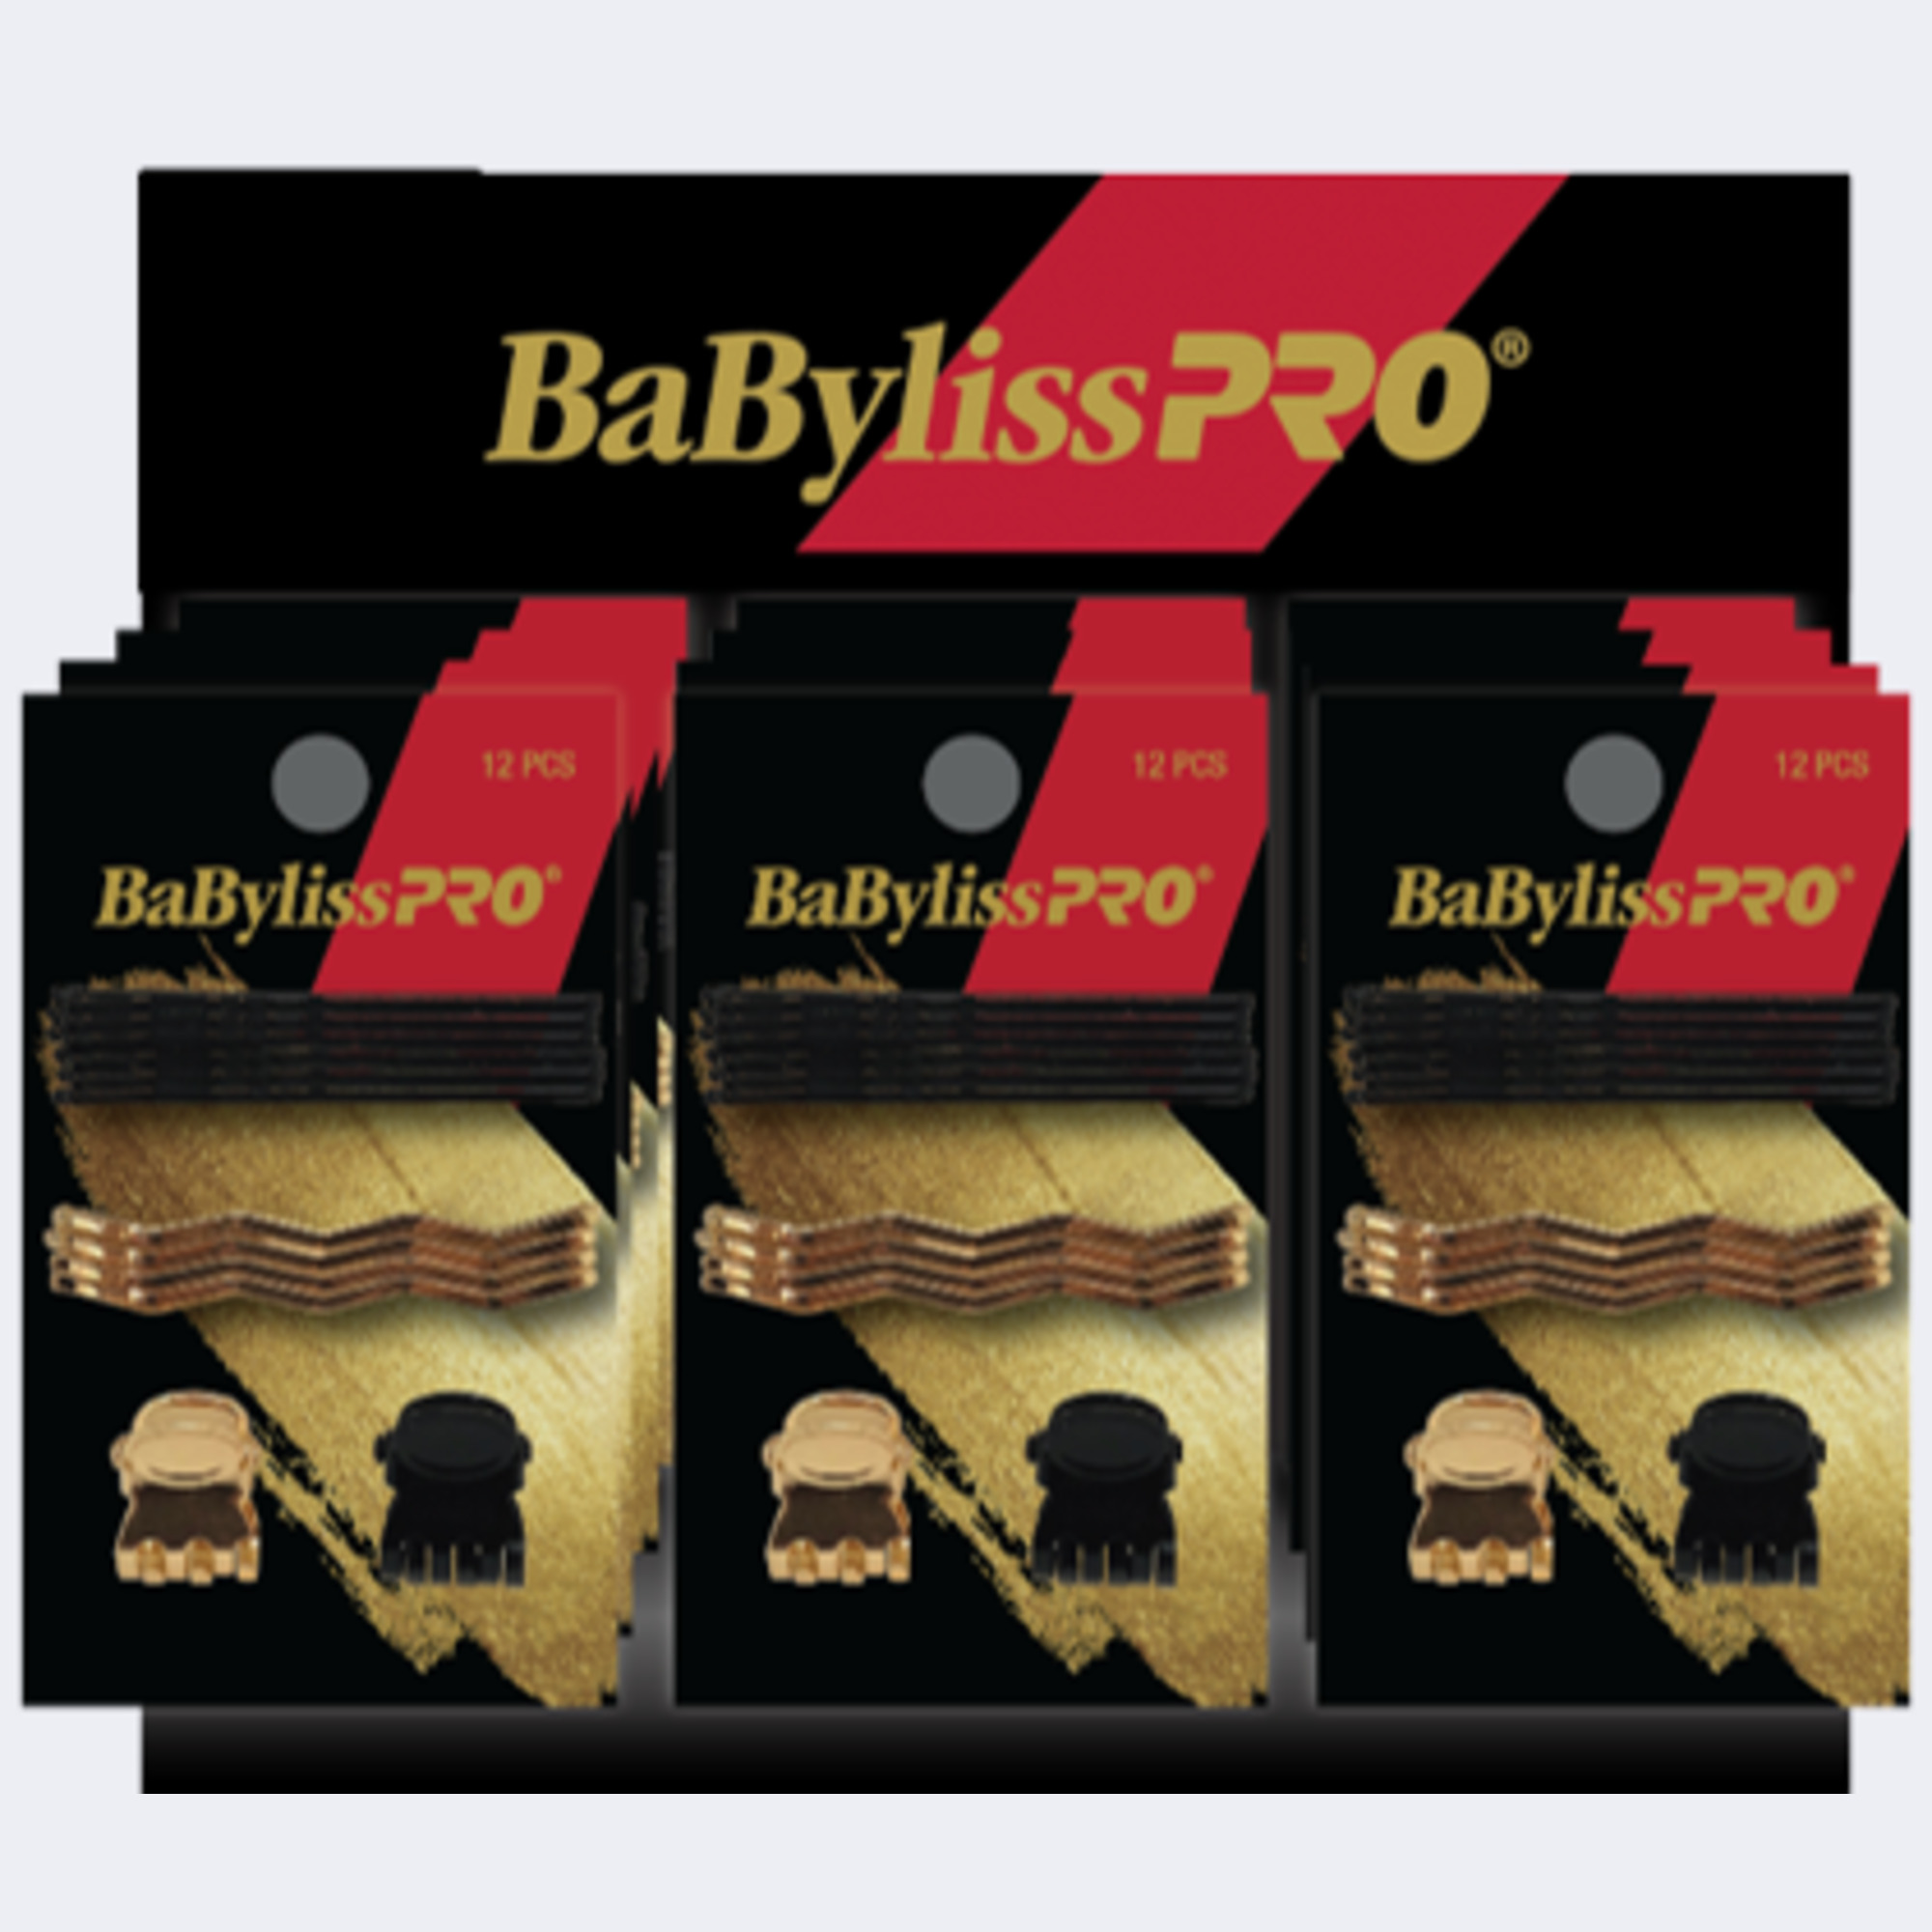 BaBylissPRO ASSORTED HAIR PINS & CLIPS 12pc Display